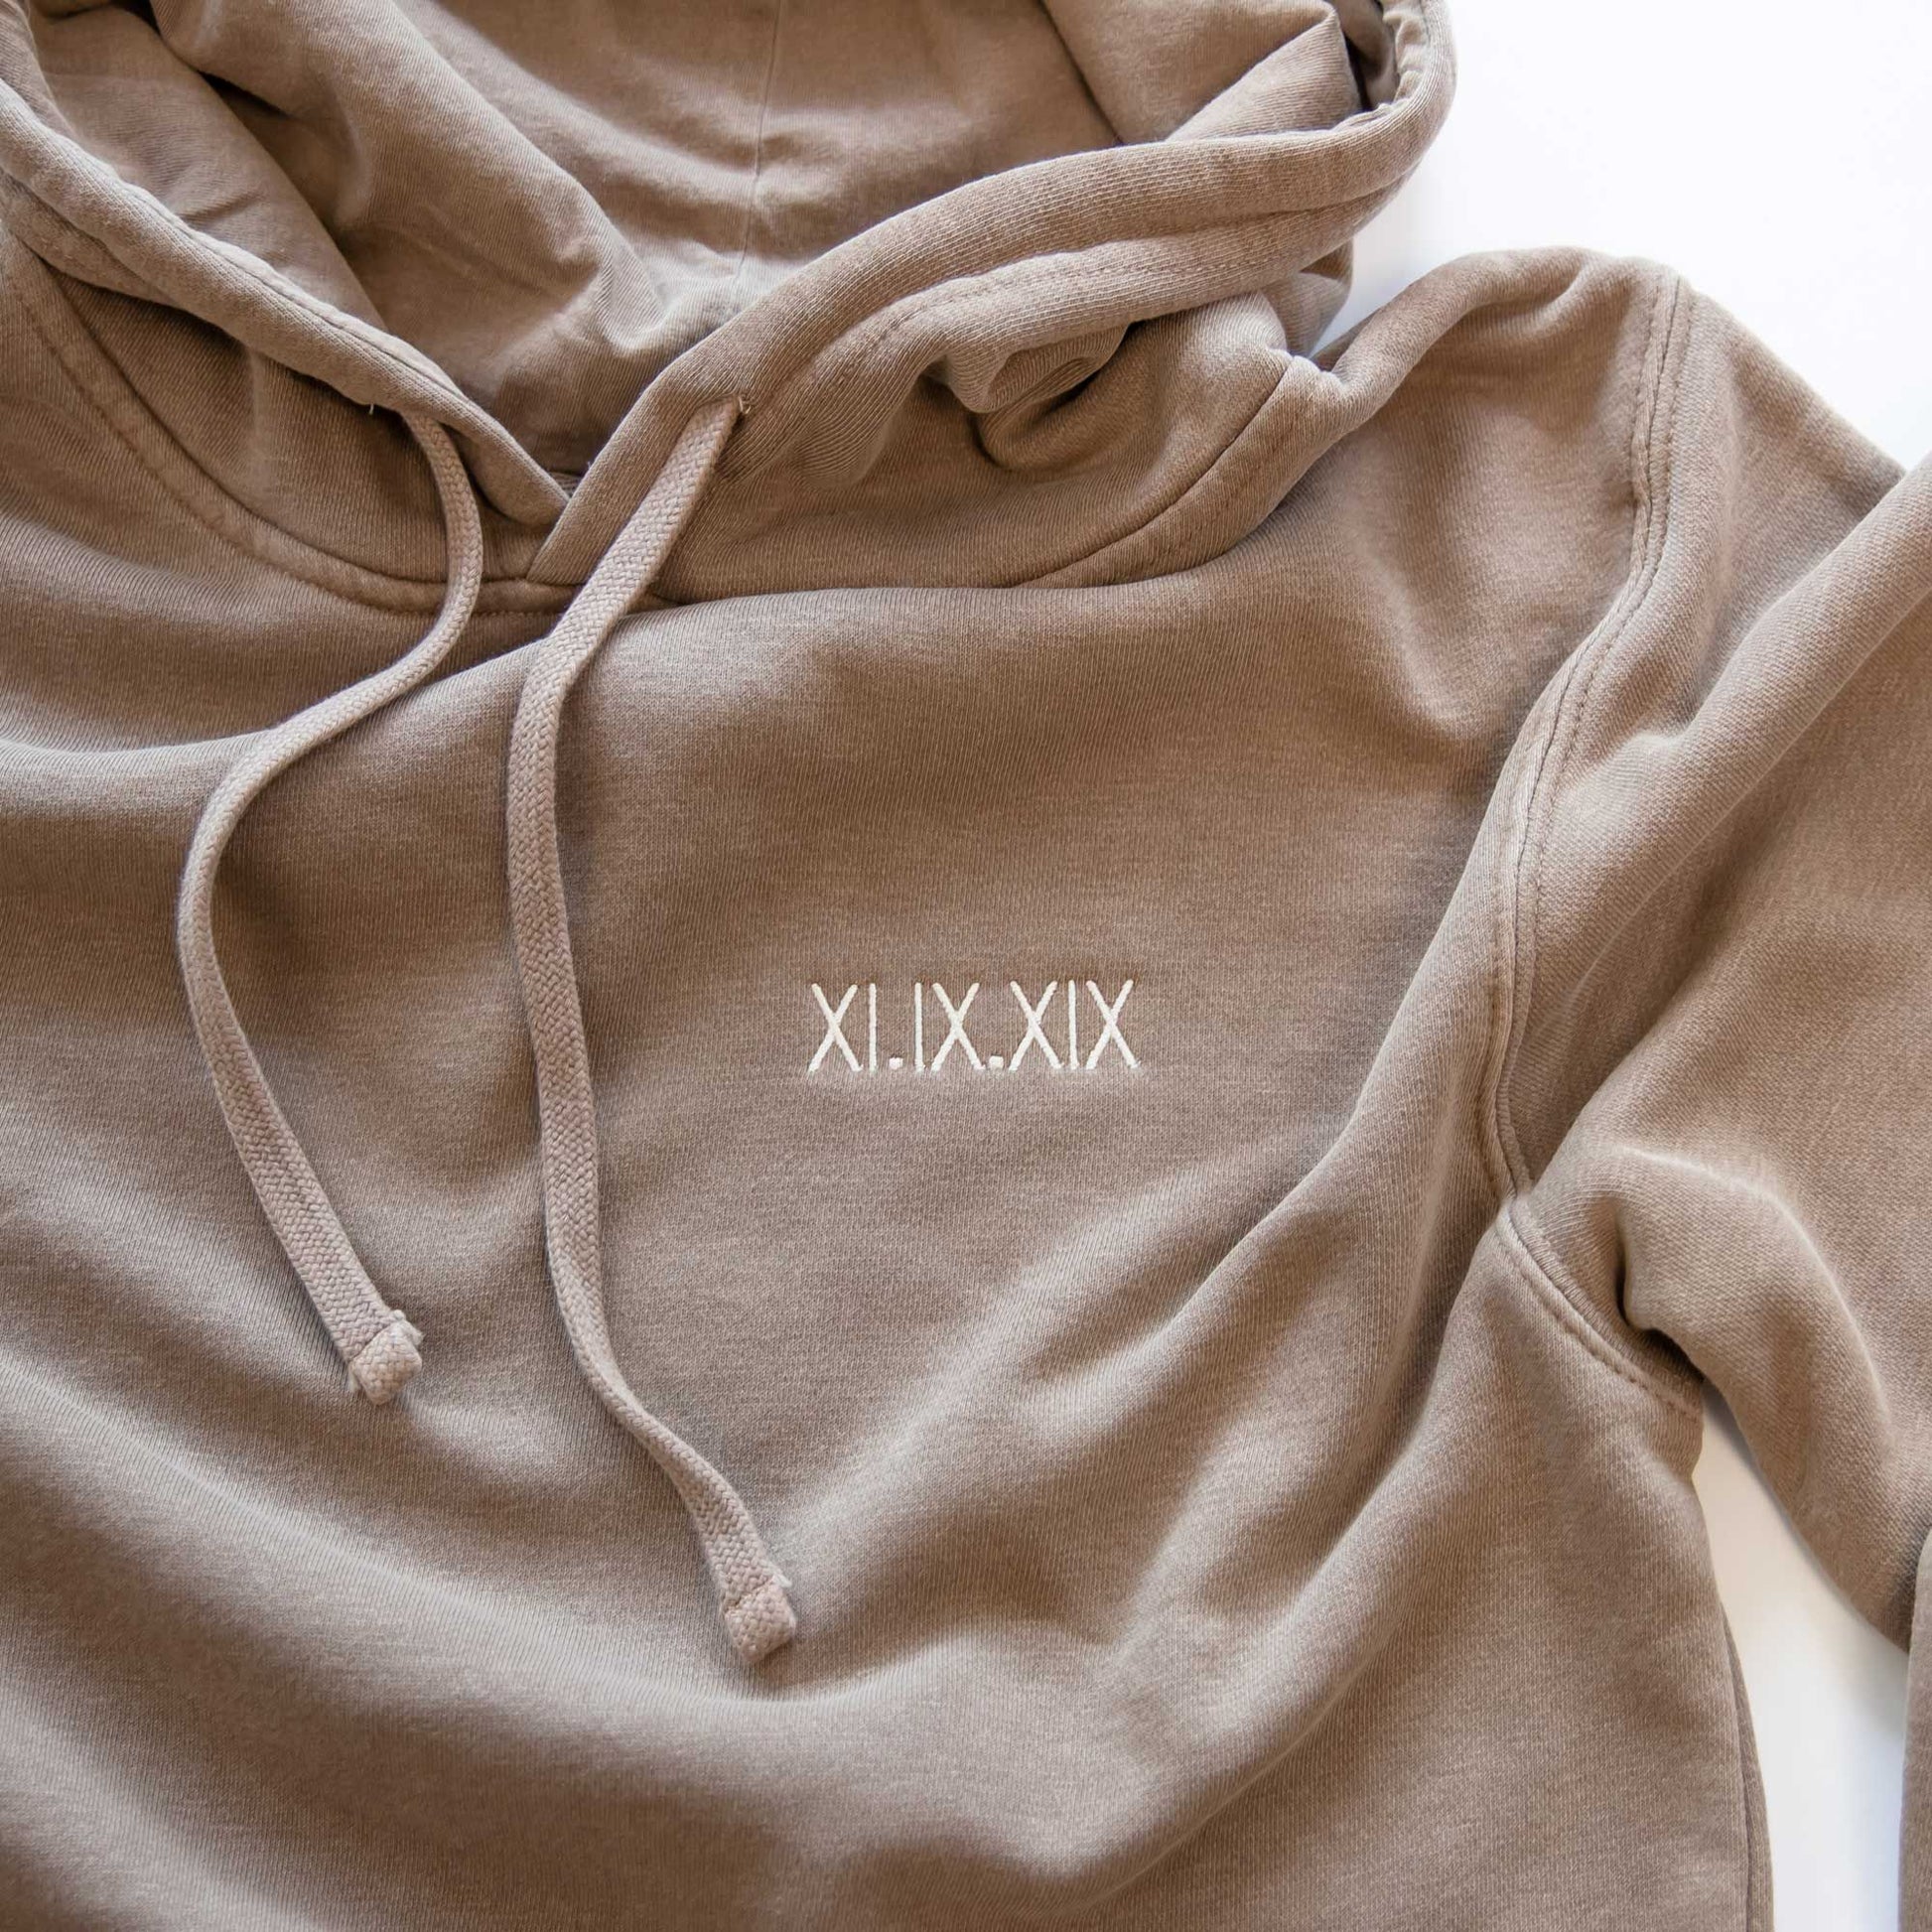 flat image of a vintage brown hooded sweatshirt with a personalized mini roman numeral embroidered design on the left chest in a natural thread